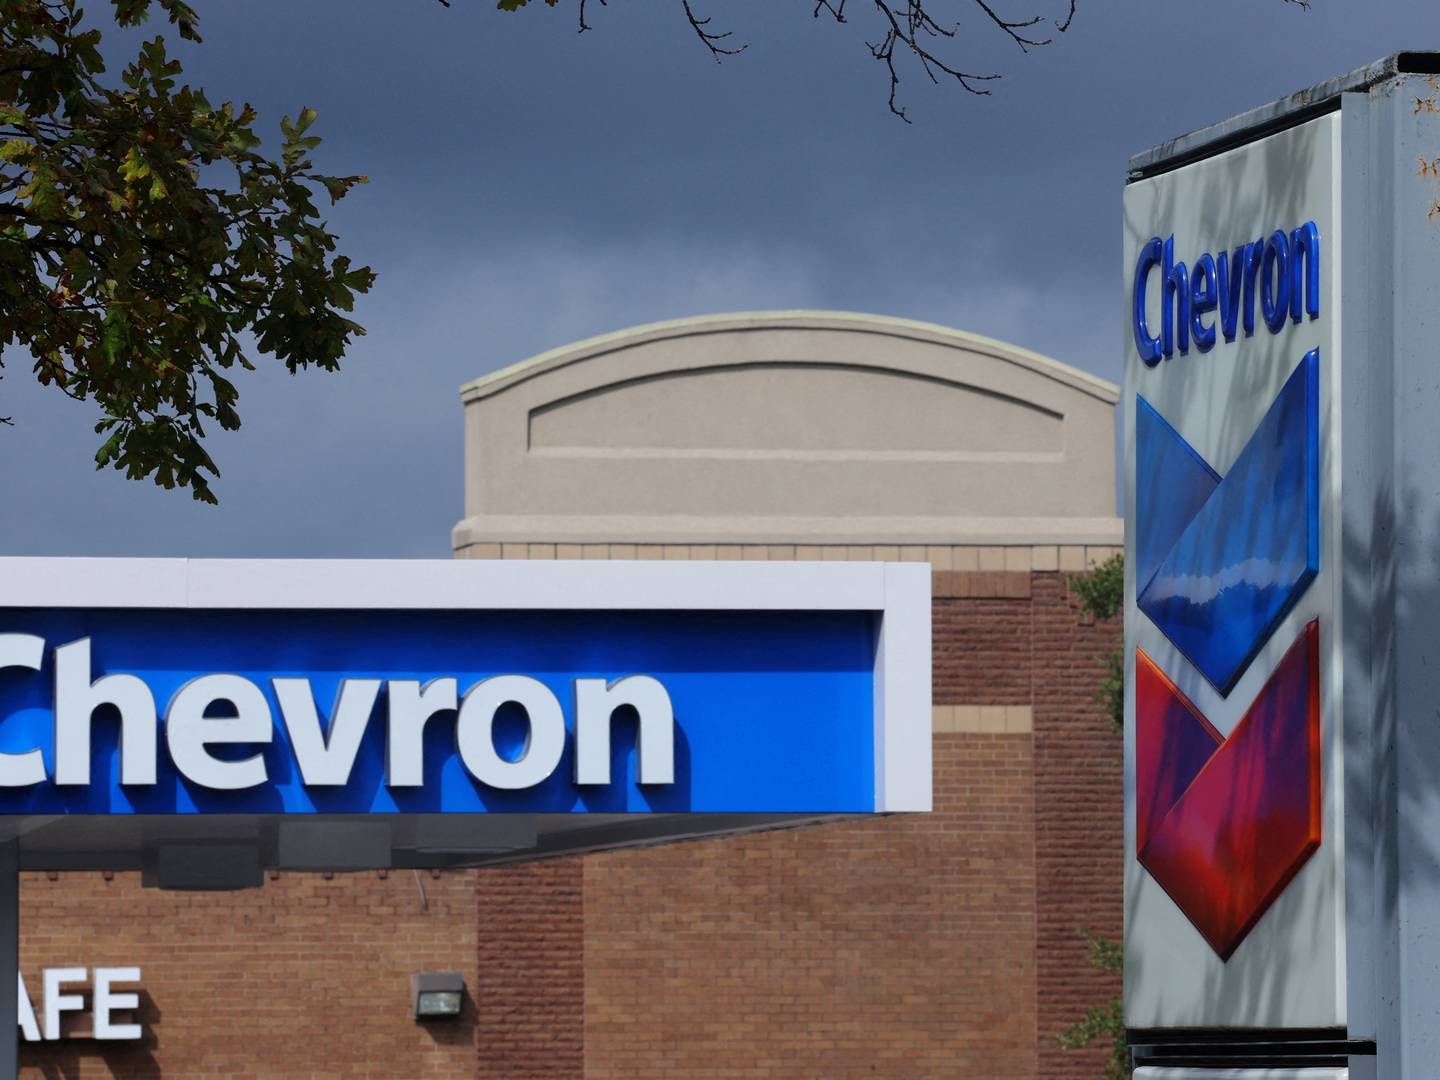 In addition to write-downs in the Gulf of Mexico, Chevron is also affected by new environmental requirements in California, resulting in less investment in the state. | Photo: Brian Snyder